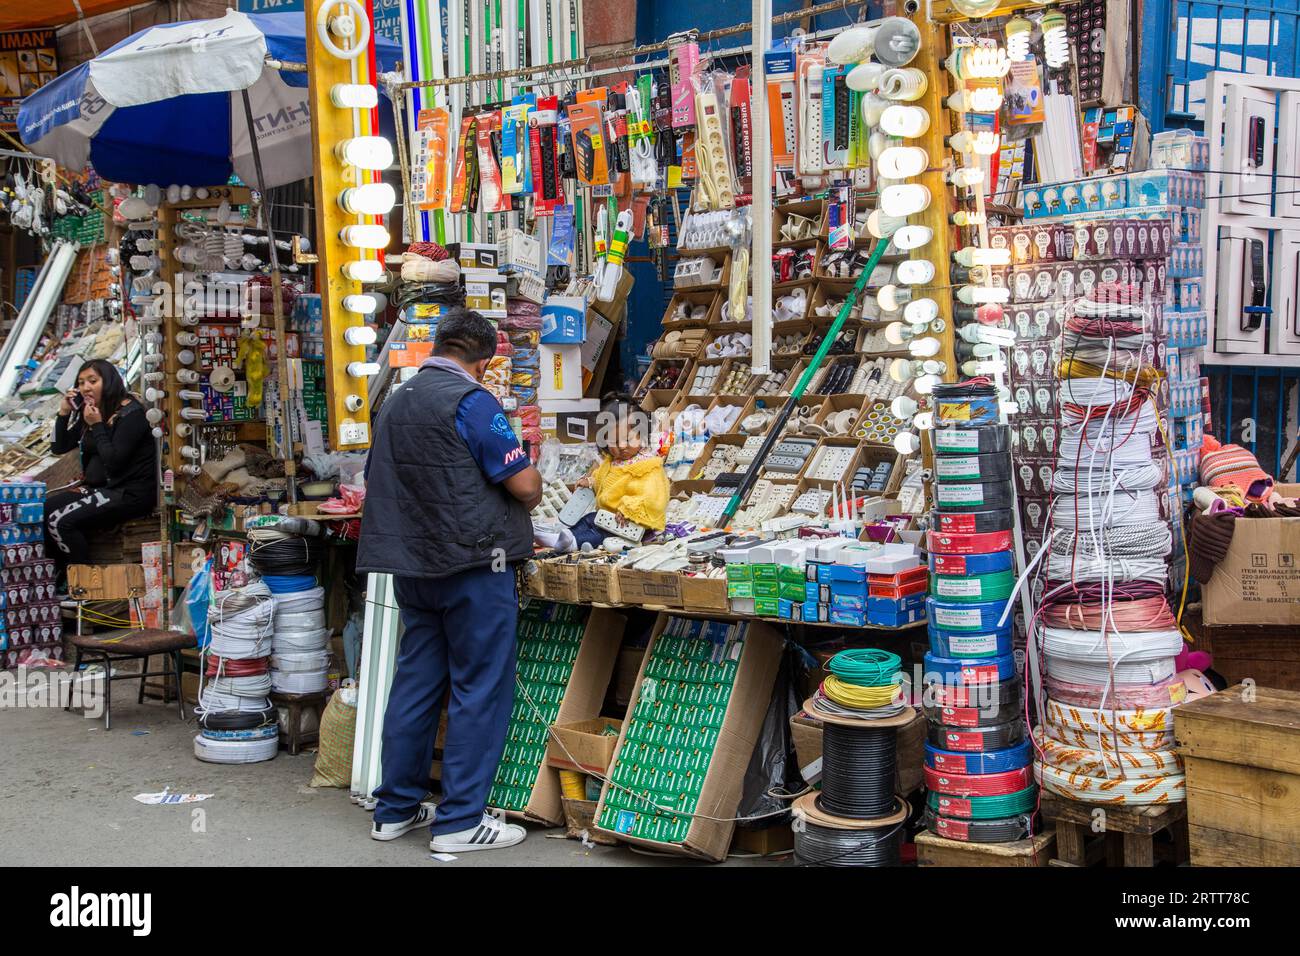 La Paz, Bolivia, October 24, 2015: People on a market in the city centre Stock Photo